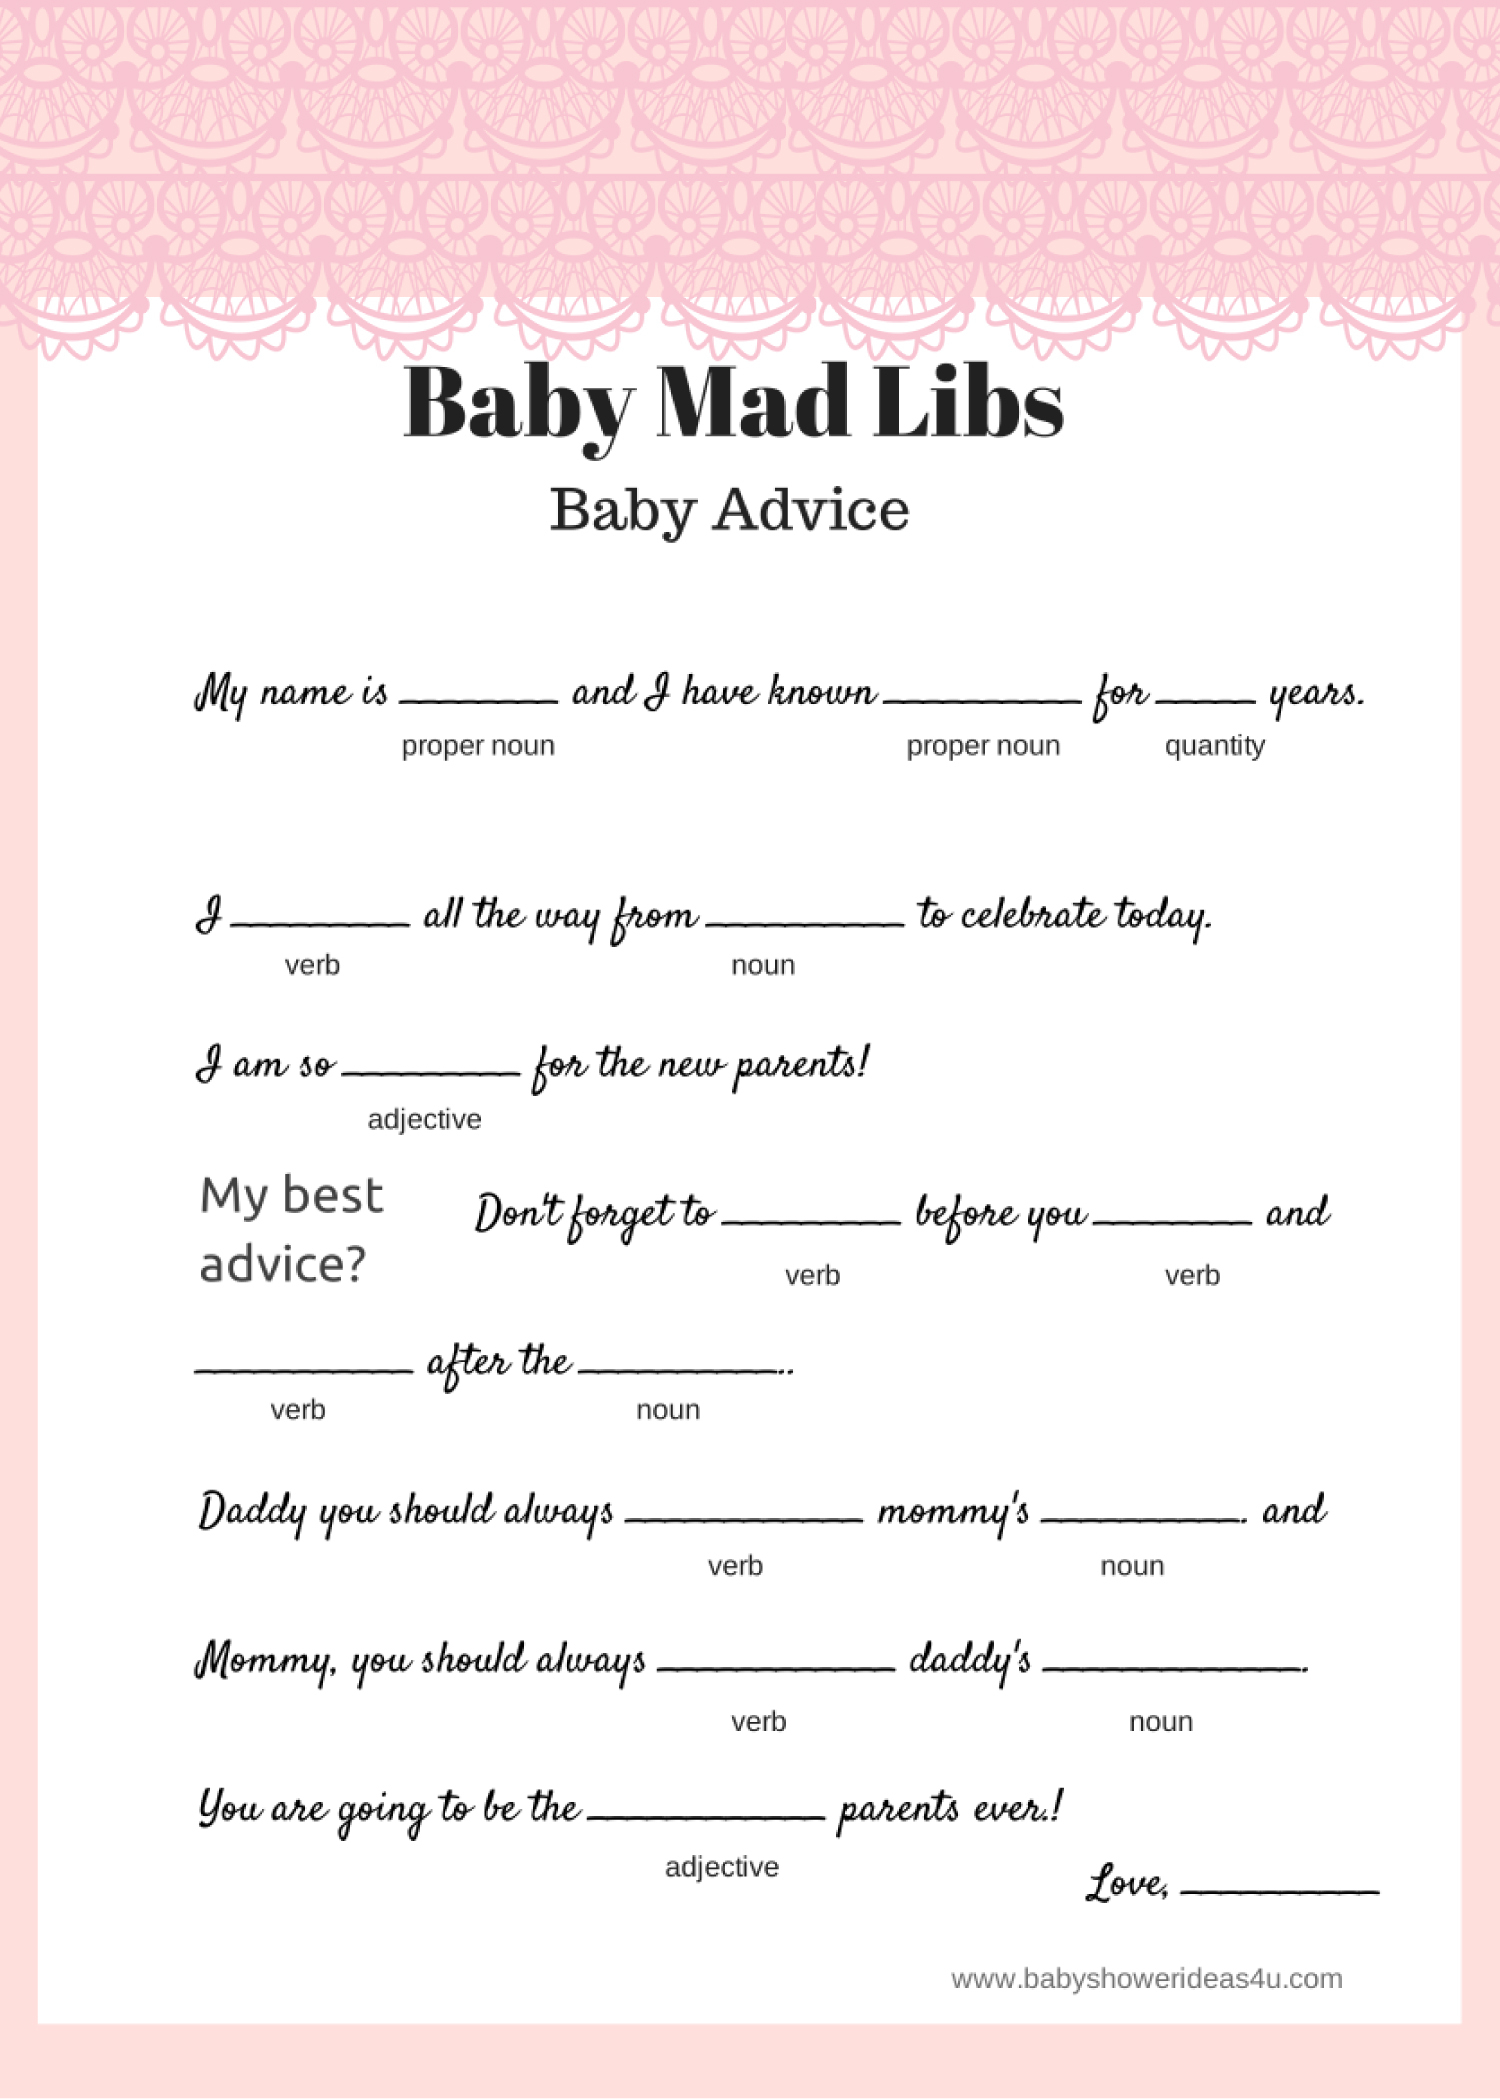 Free printable baby mad libs pink lace Baby Shower Ideas 4U